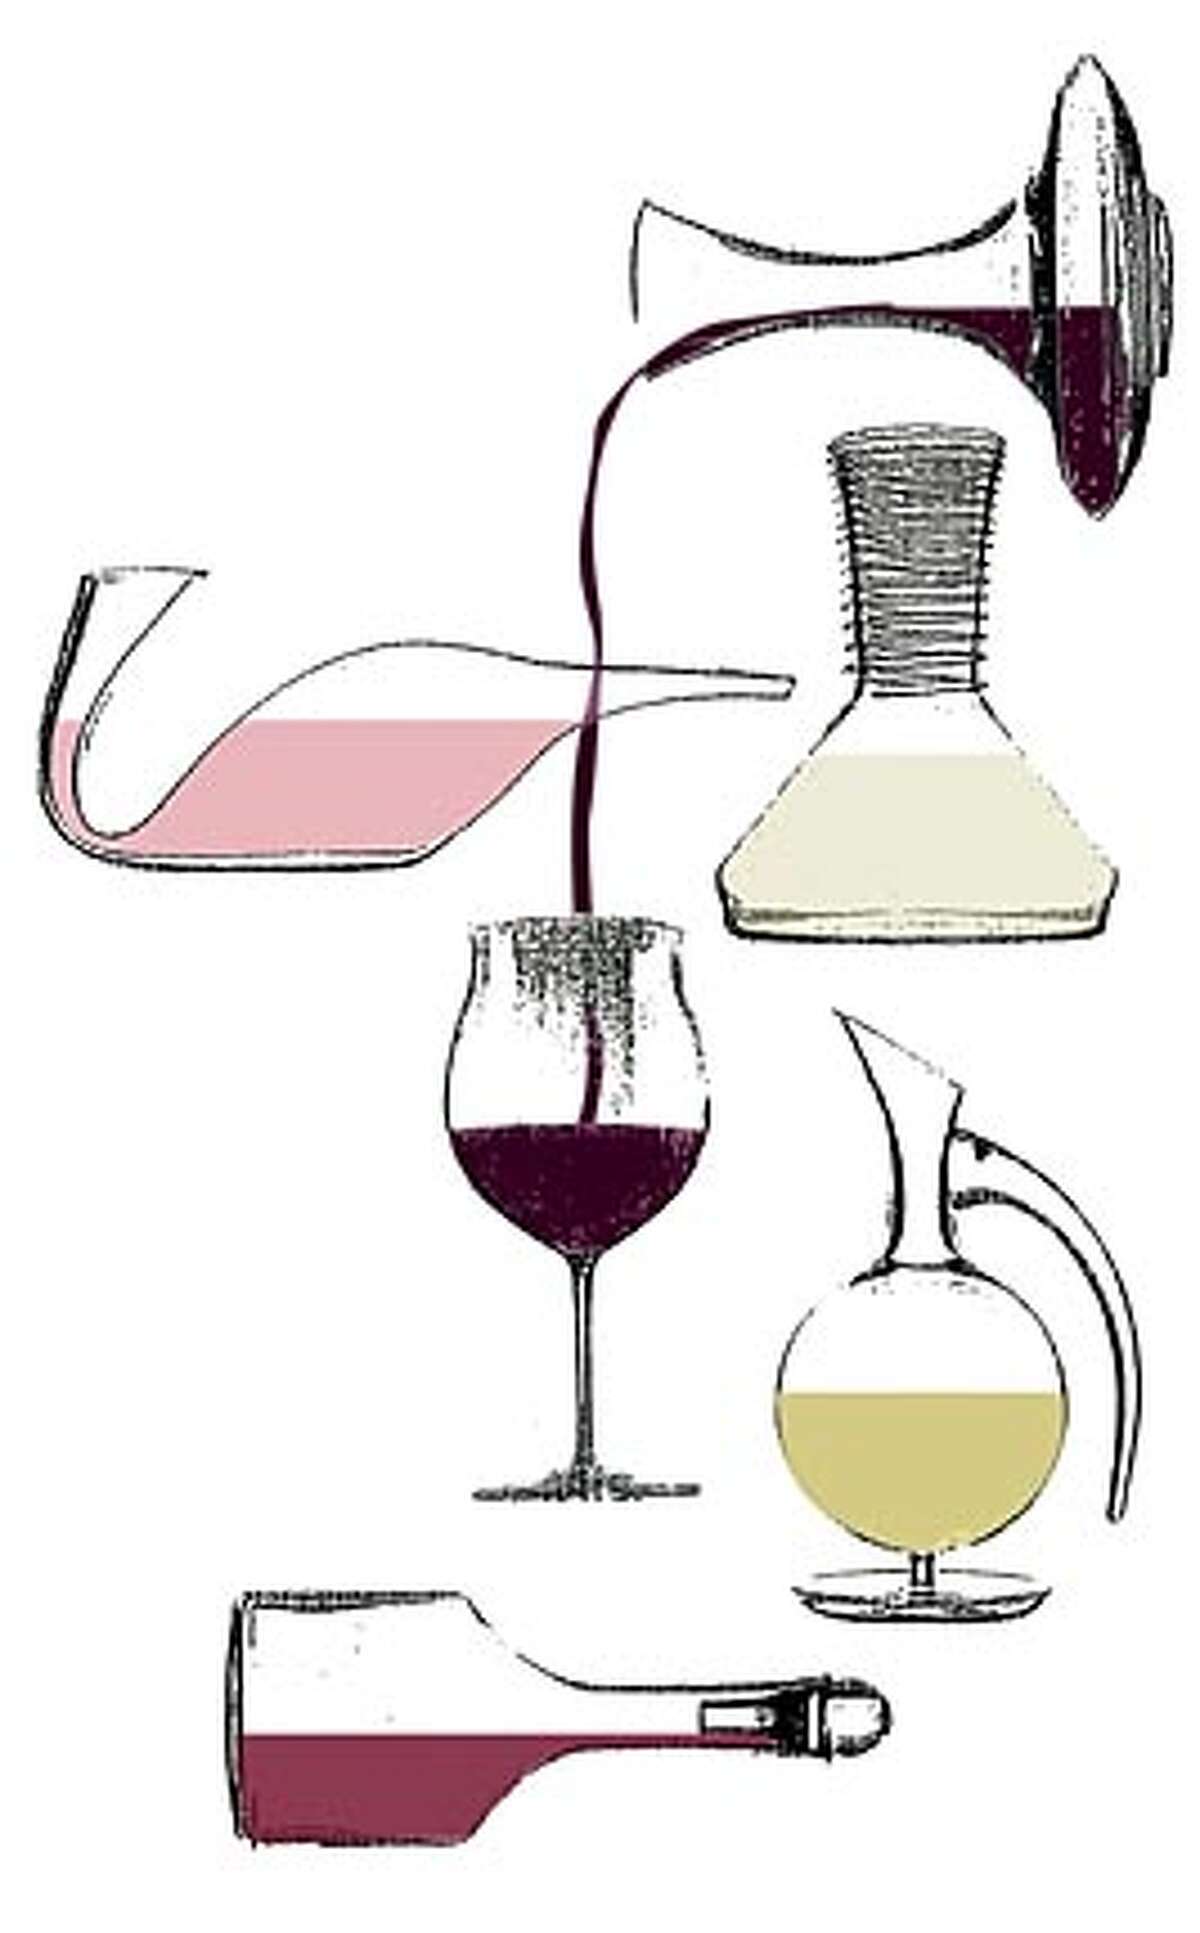 Decanter models from Riedel the Wine Glass Co. include (clockwise from top right) Ultra, Sommeliers, Pomerol, Dominus and Vinum Extreme. Chronicle illustration by Hulda Nelson